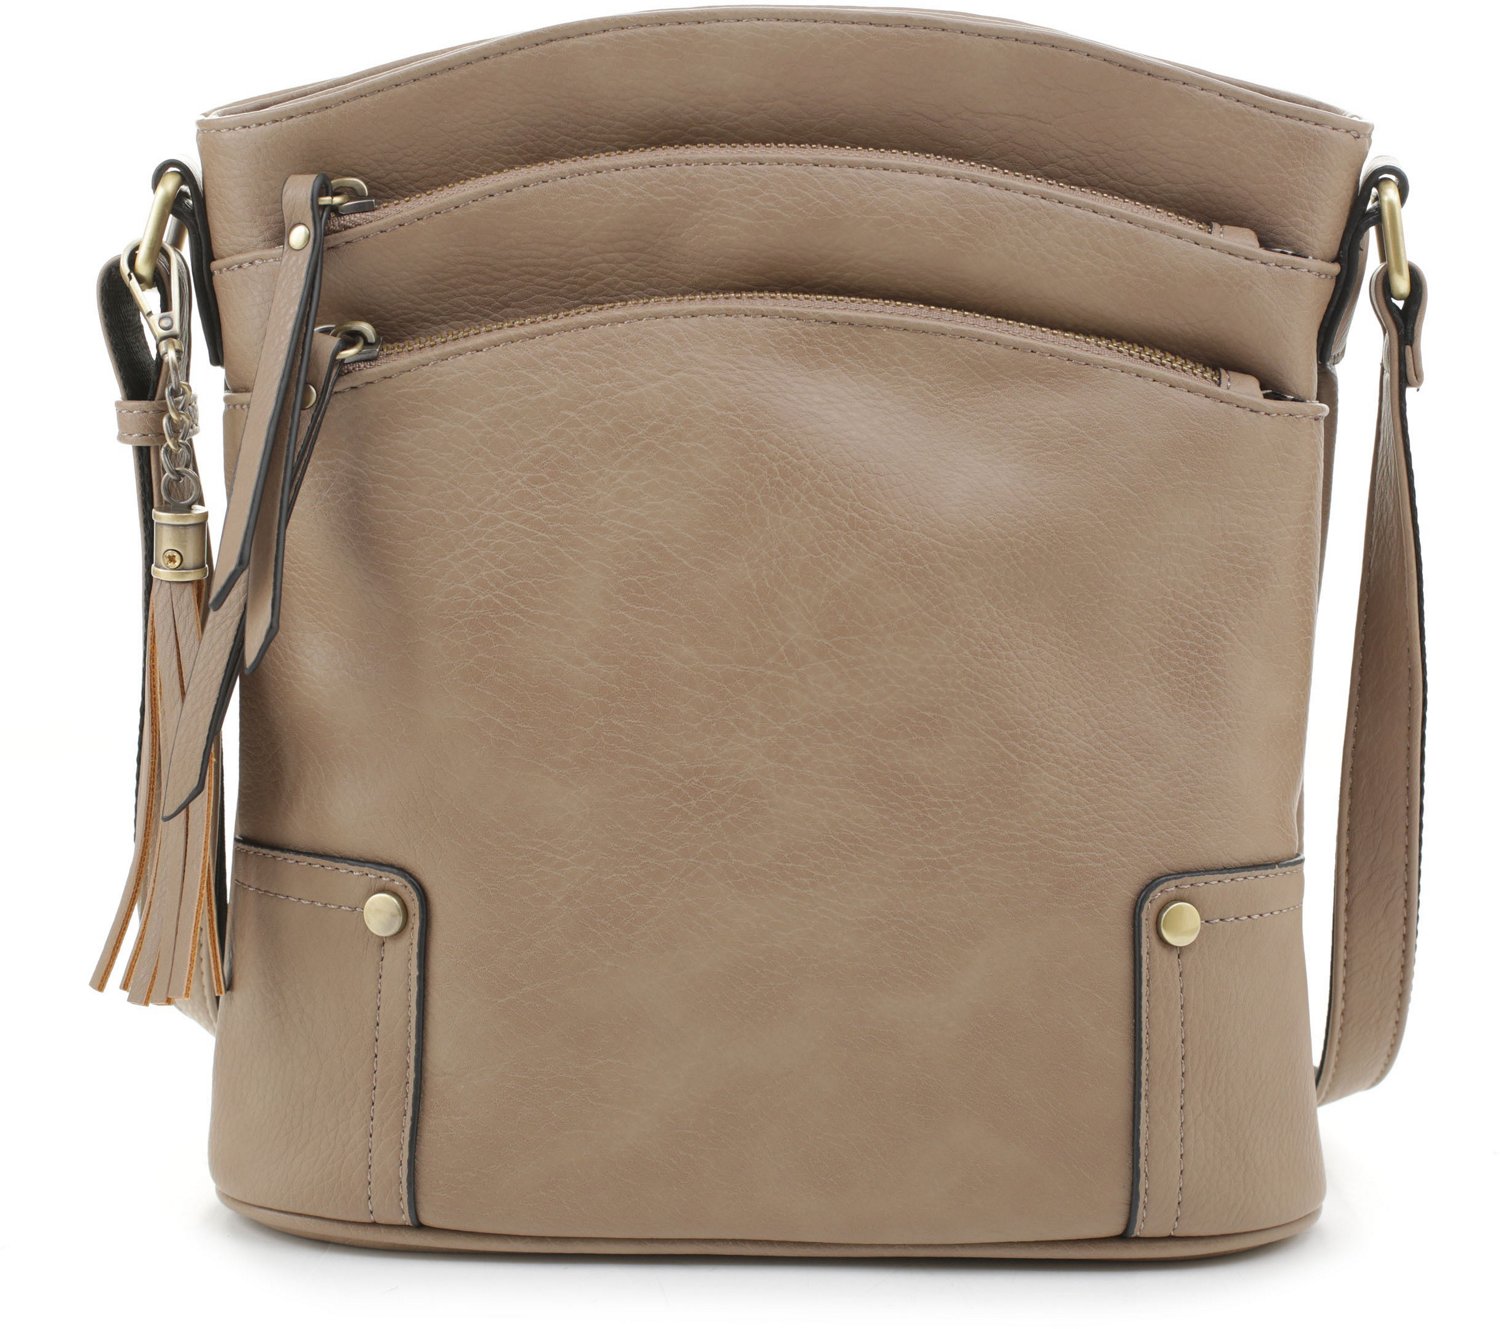 Jessie & James Robin Concealed Carry Lock and Key Crossbody Bag | Academy